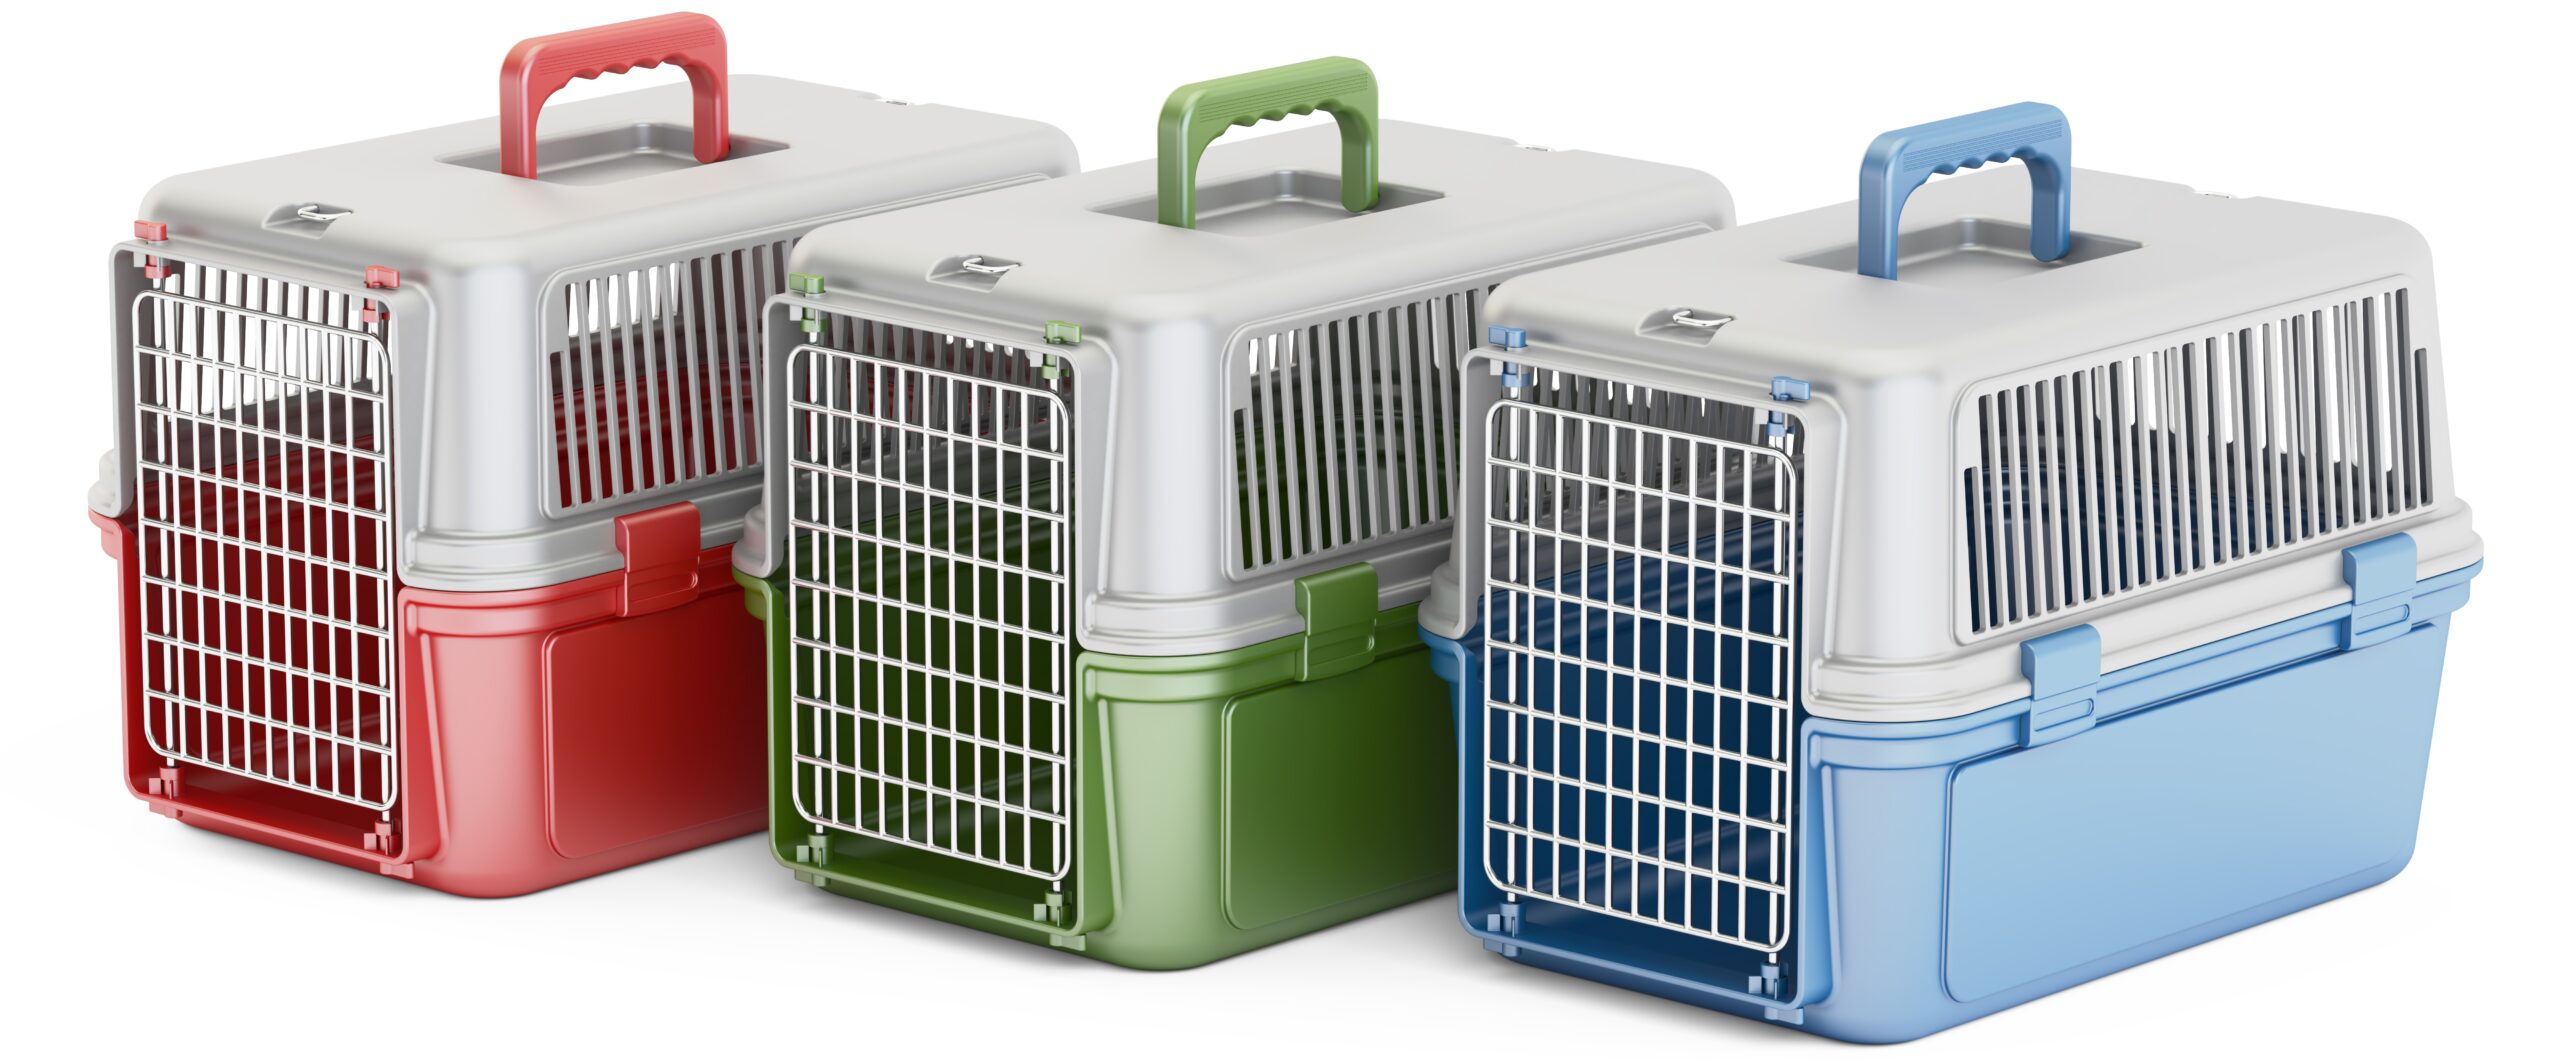 Best types of crates for Pit Bulls